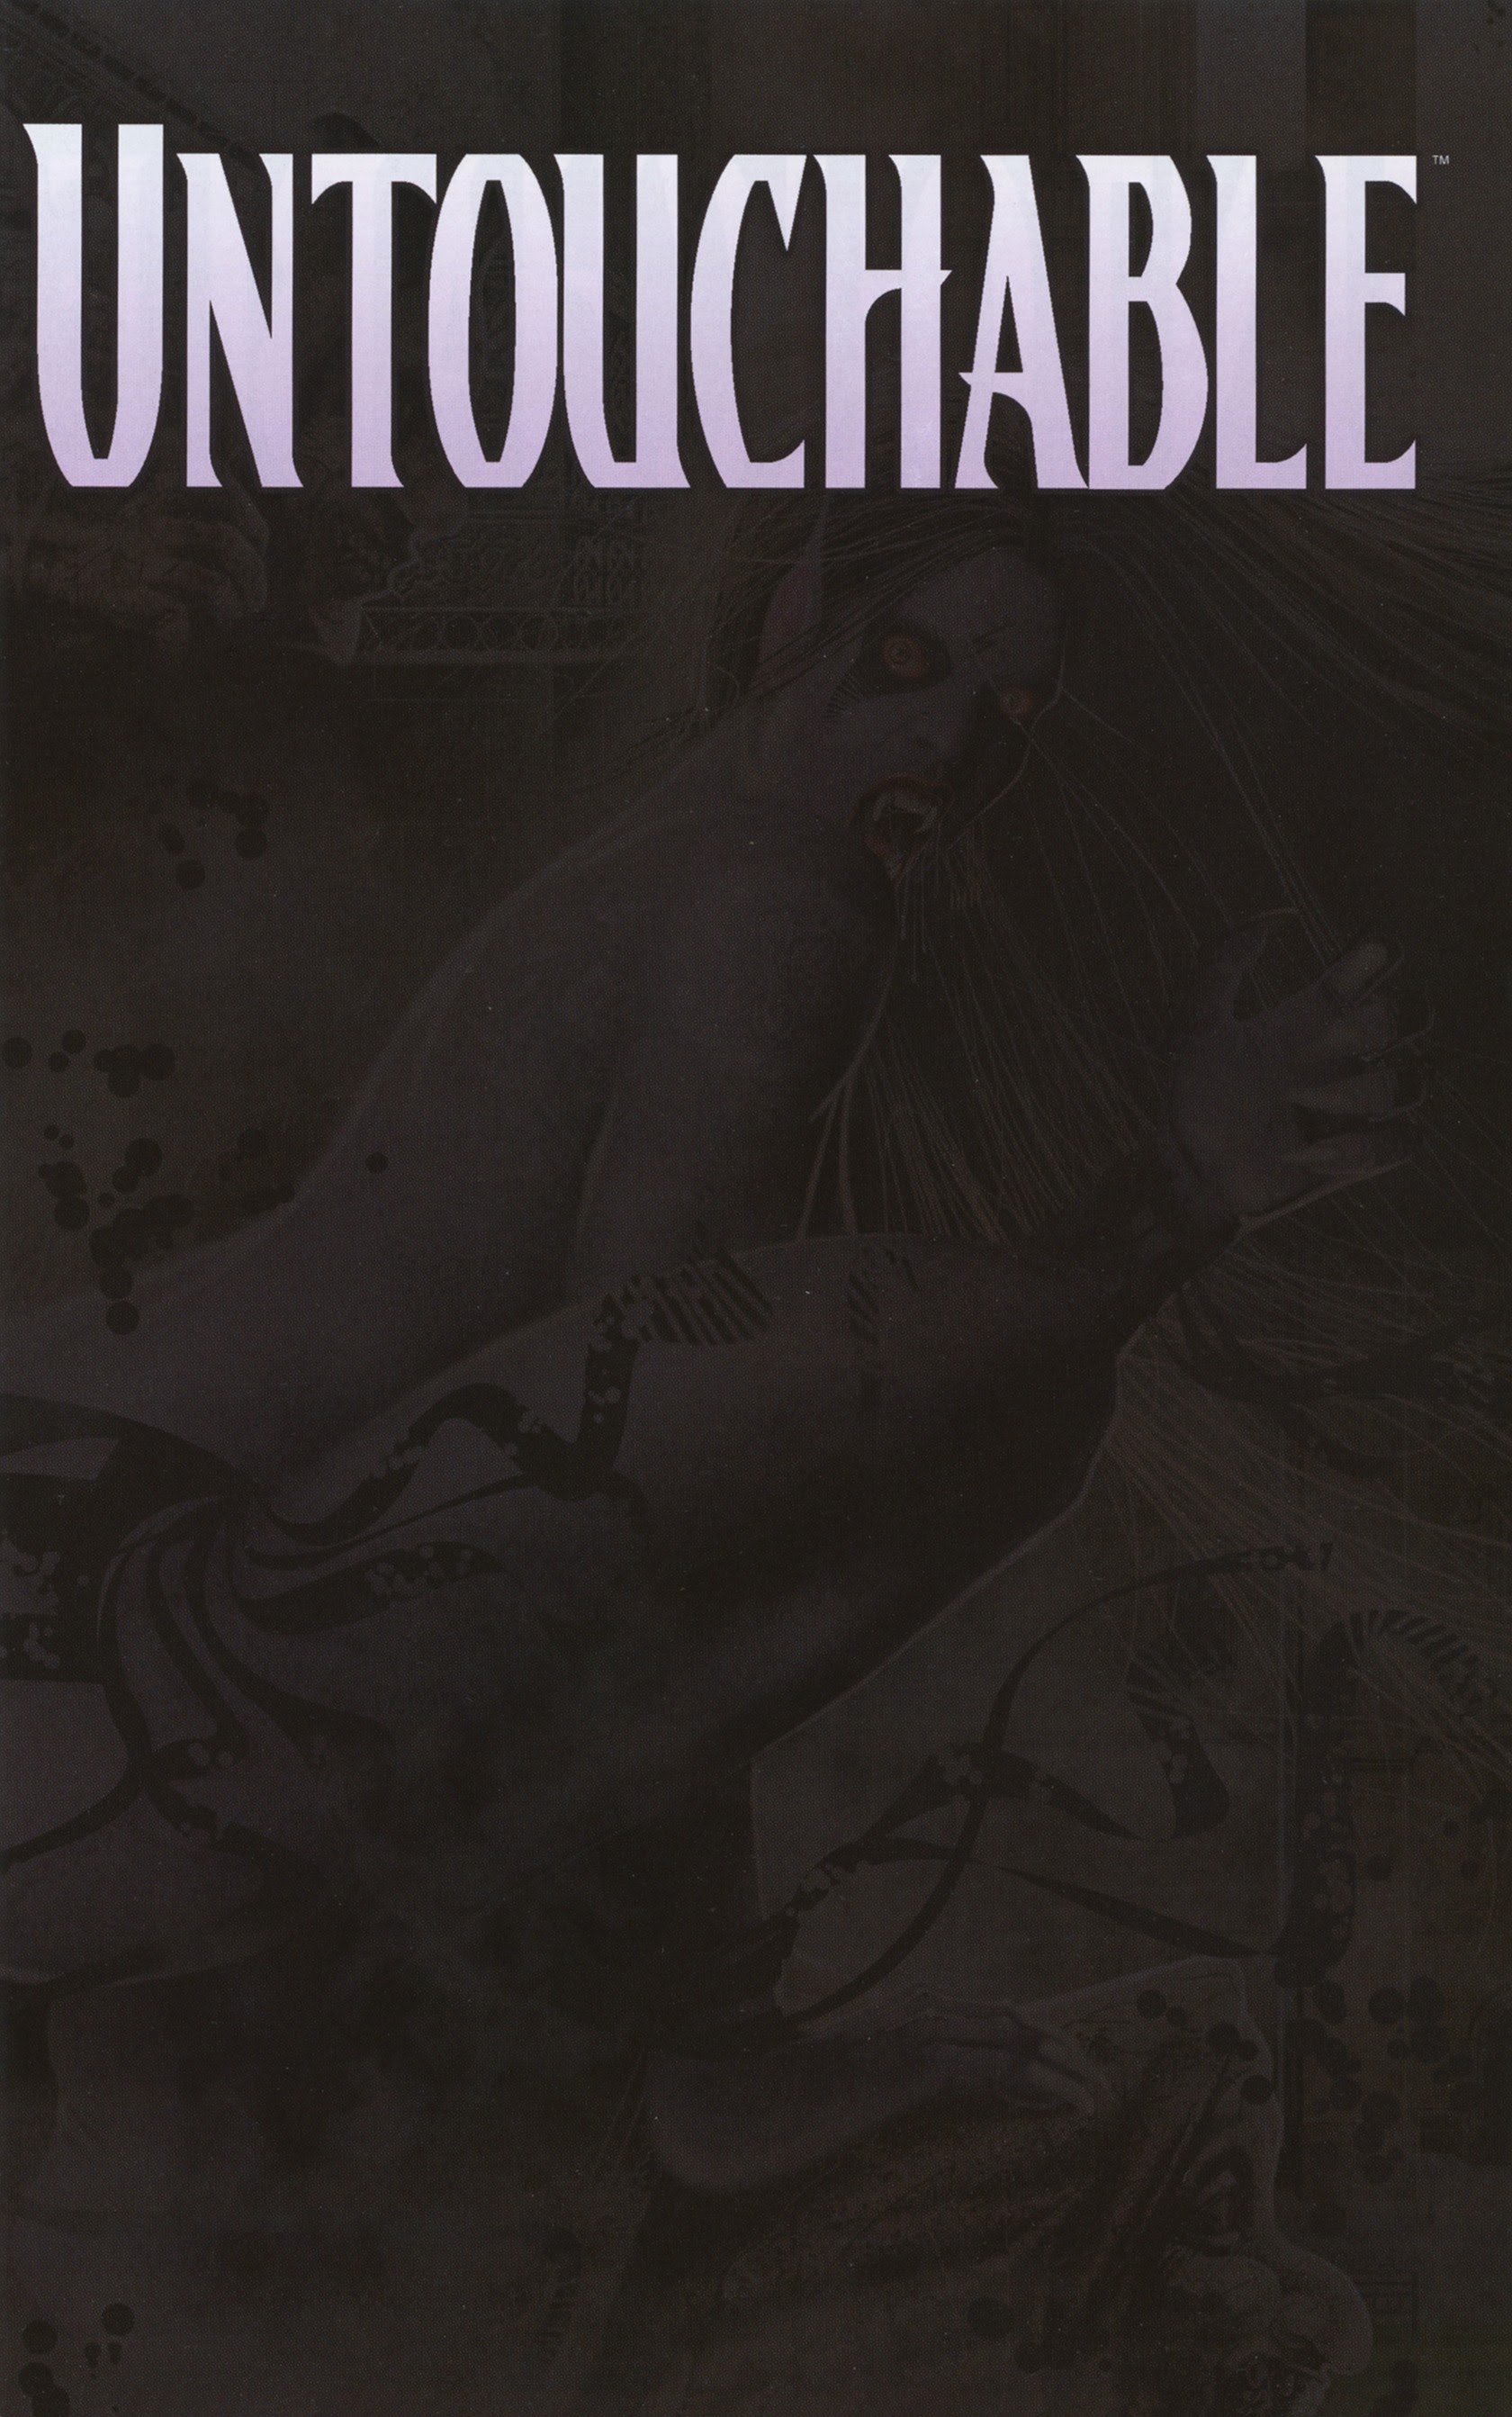 Read online Untouchable comic -  Issue # Full - 3